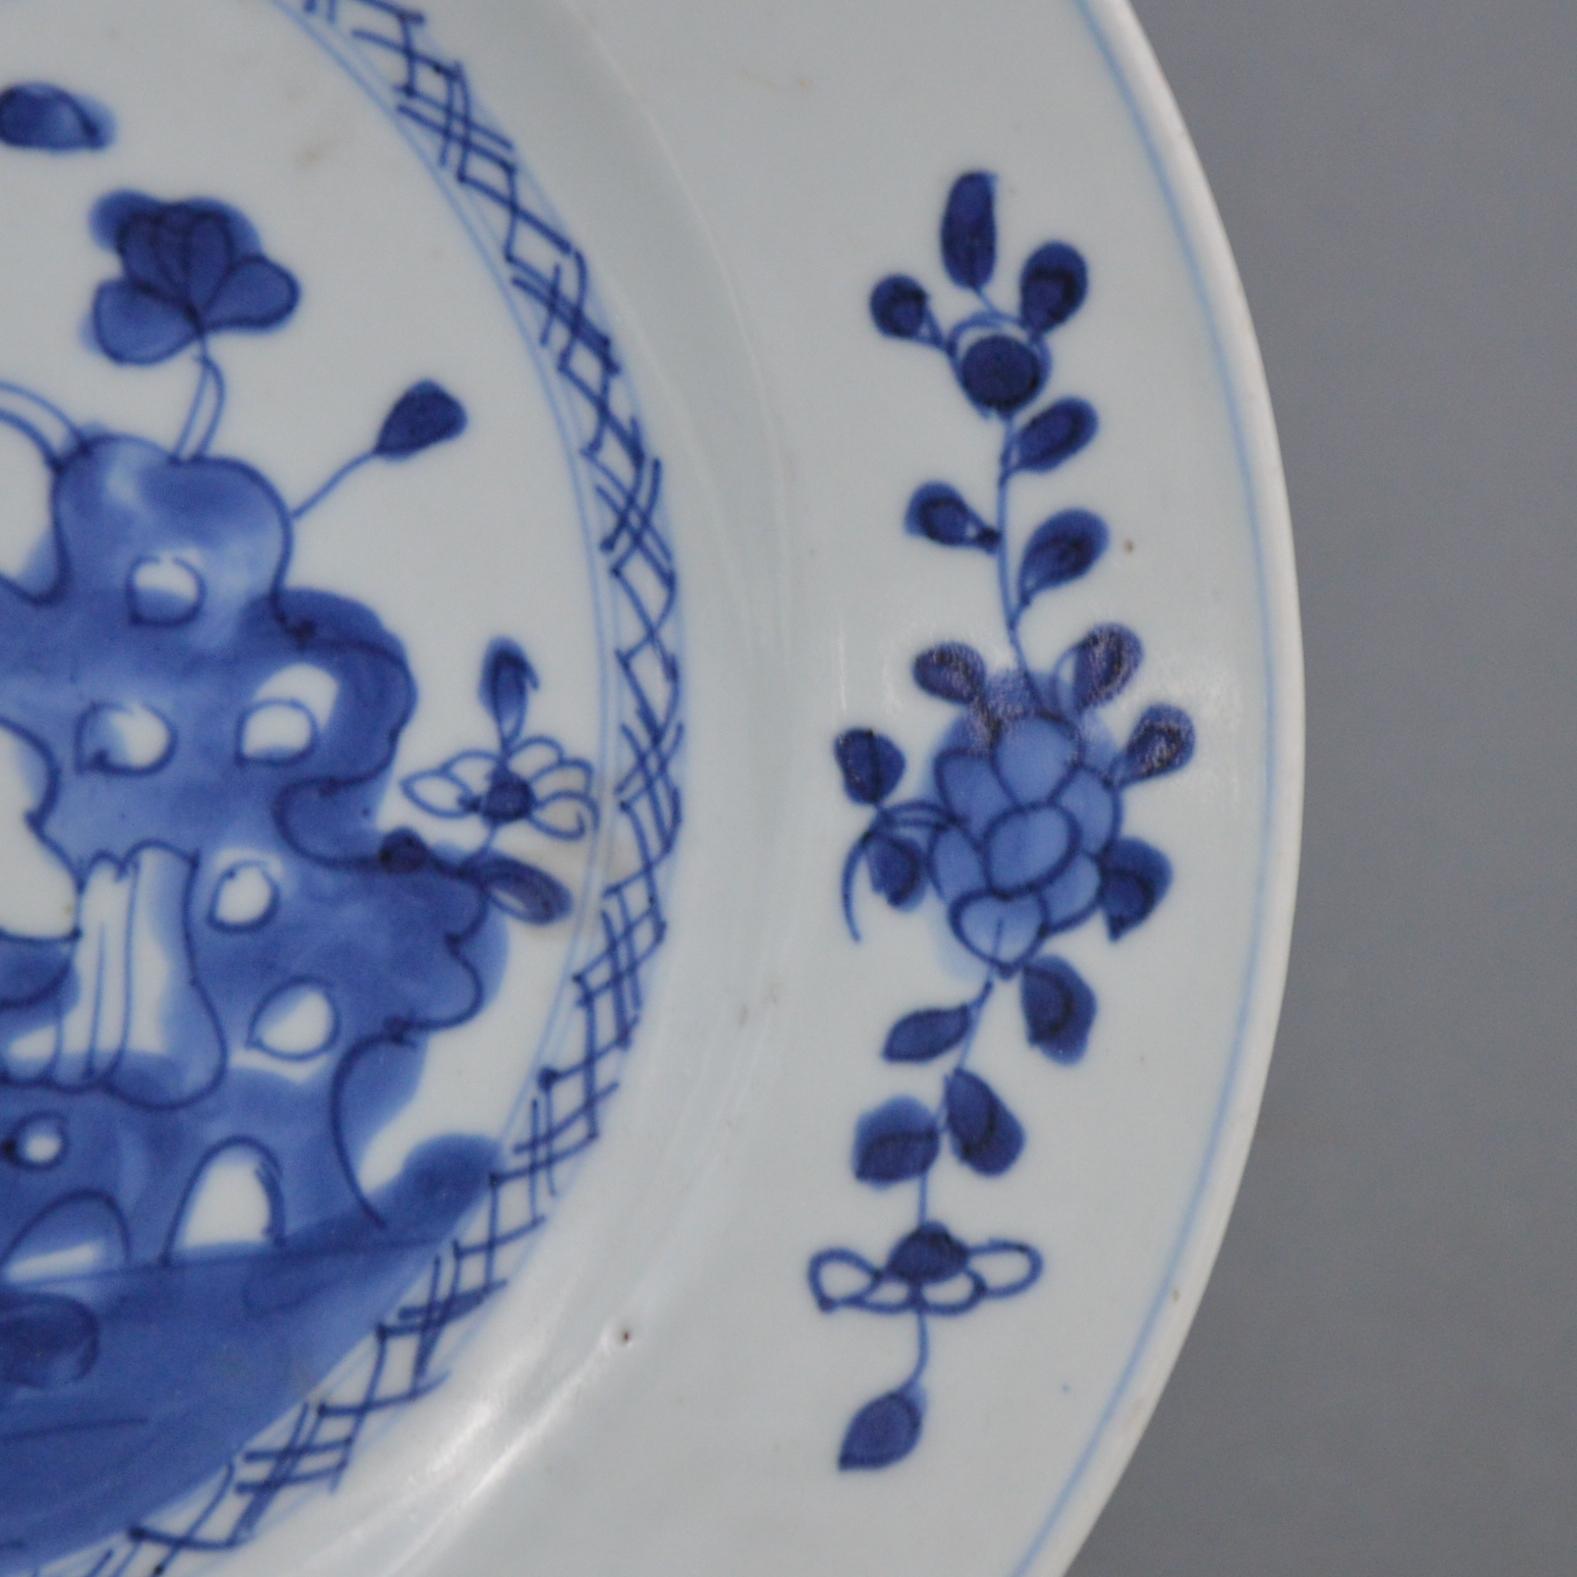 Antique Chinese porcelain plate with underglaze cobalt decoration. Qing period, 18th century.
Very good condition, just some minor firing defects.